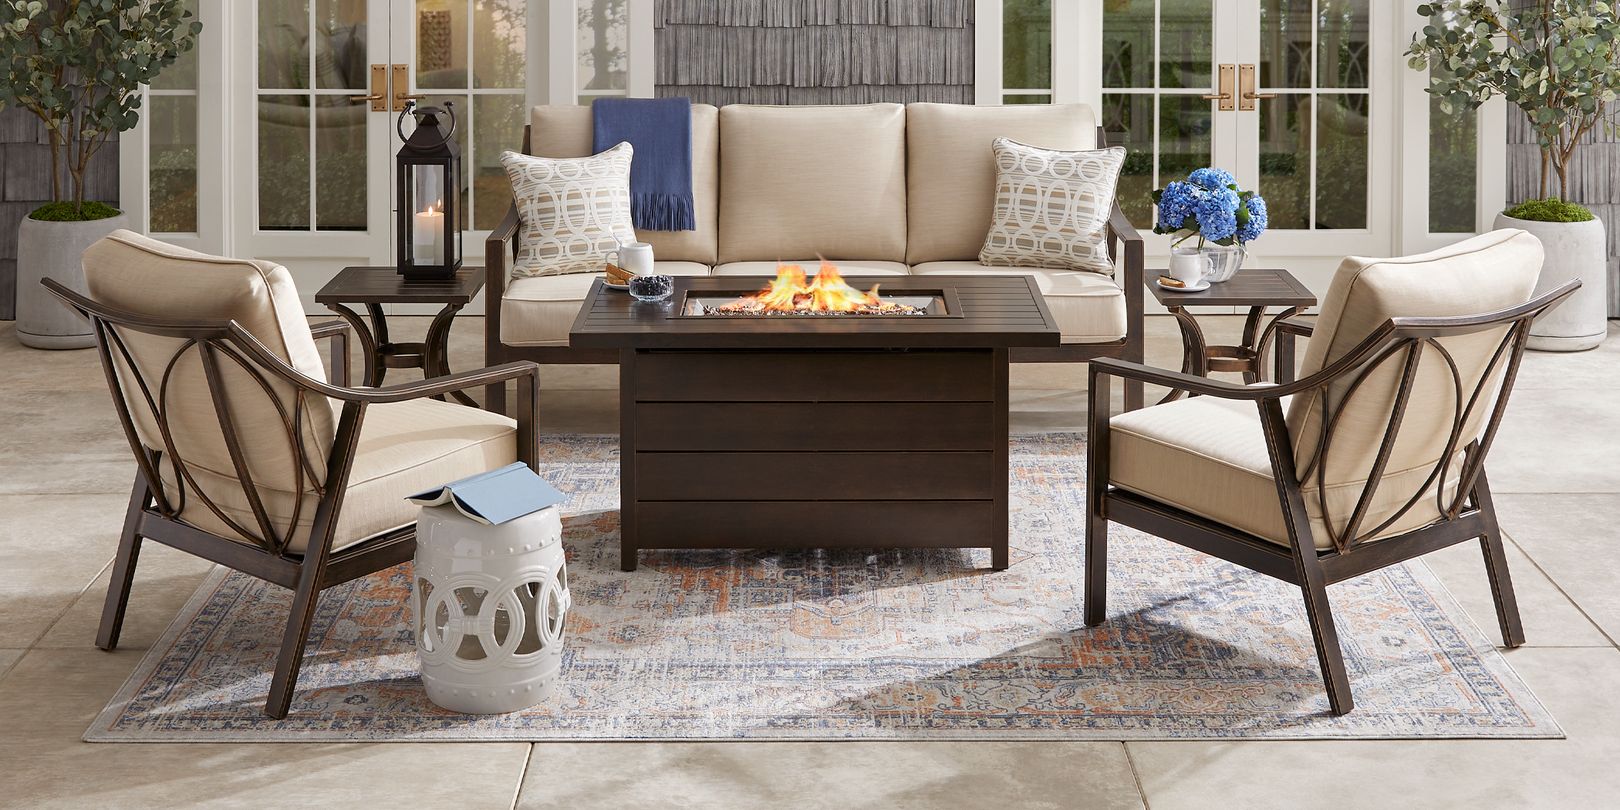 Photo of bronze outdoor seating set with a fire pit table